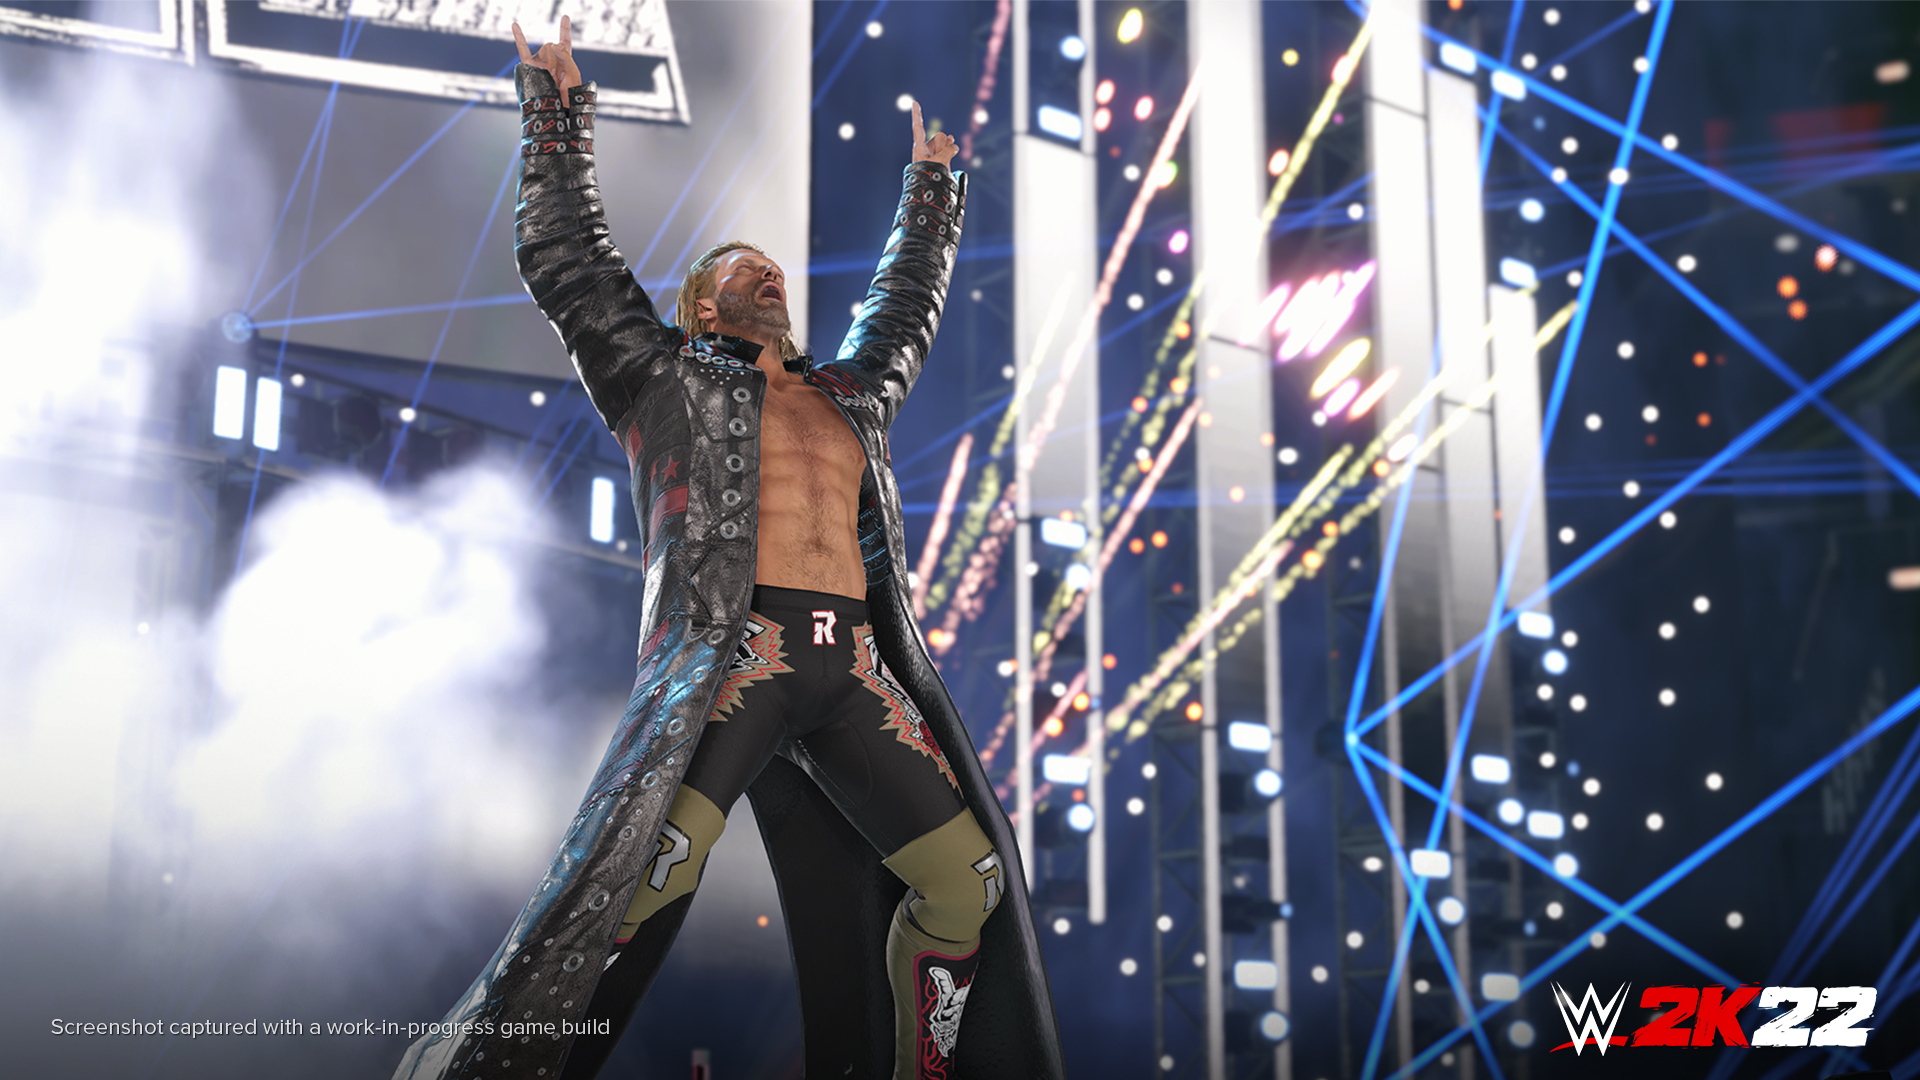 2K Announces 'WWE 2K22' Will Be Delayed, Shares New Trailer